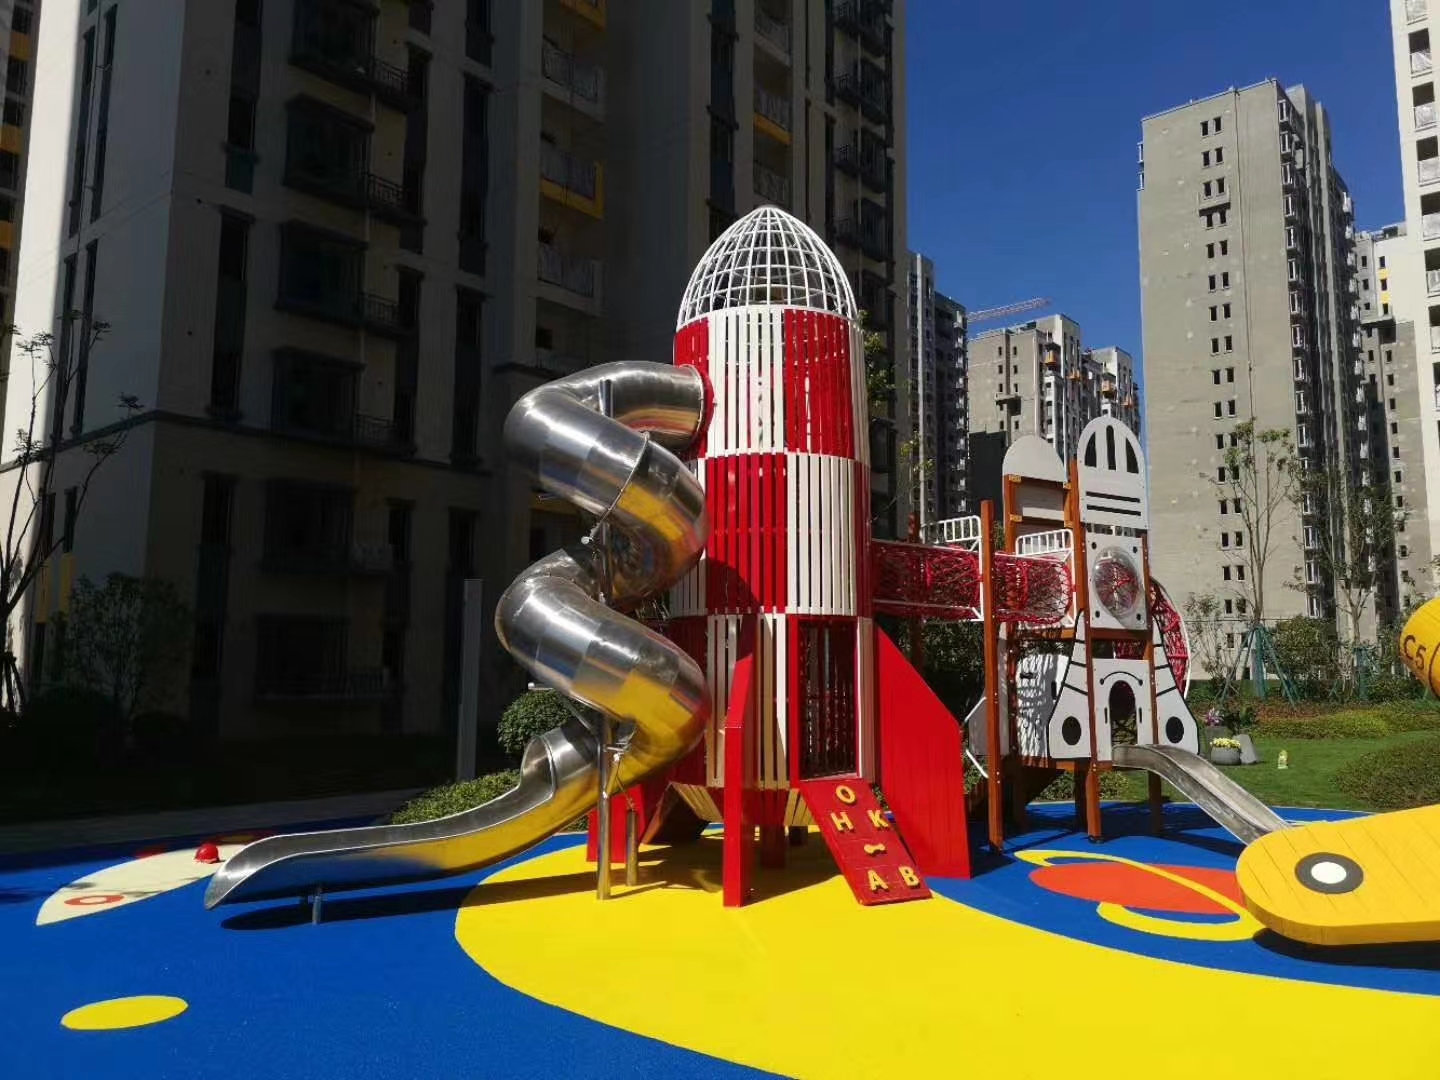 Stainless steel slides creat safety and happiness in kids’ playground (2)